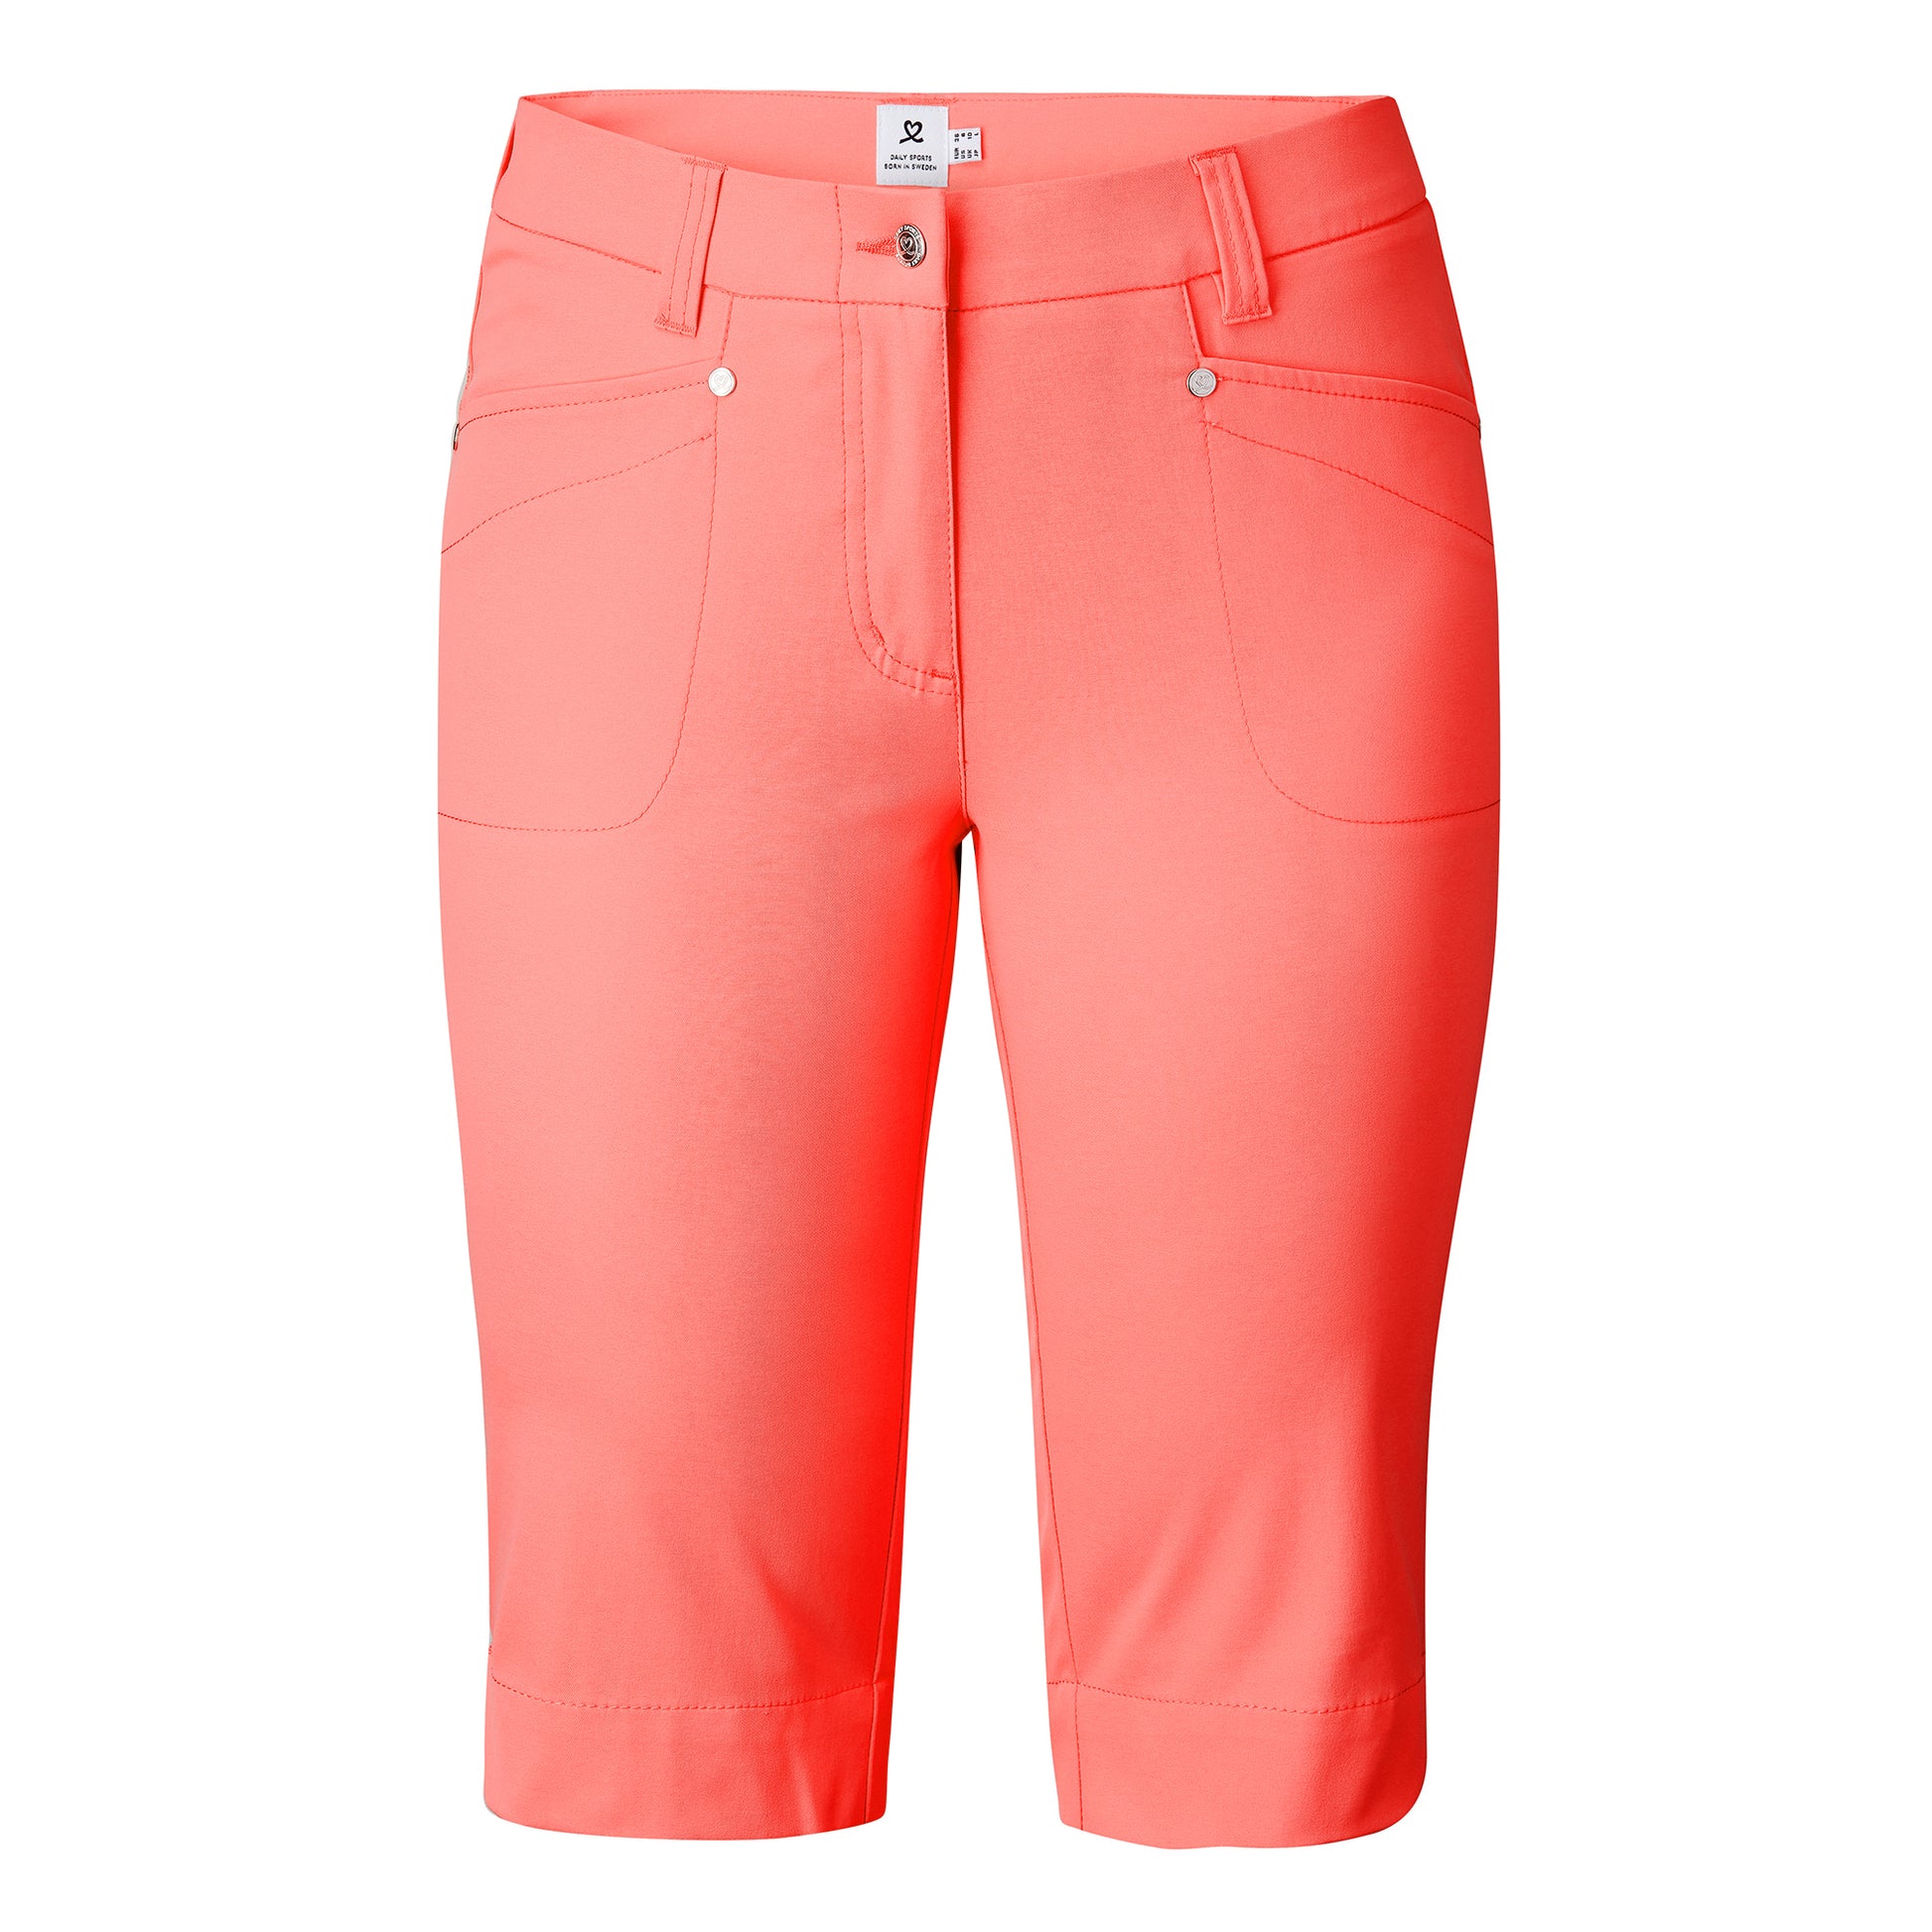 Daily Sports Ladies City Shorts in Coral